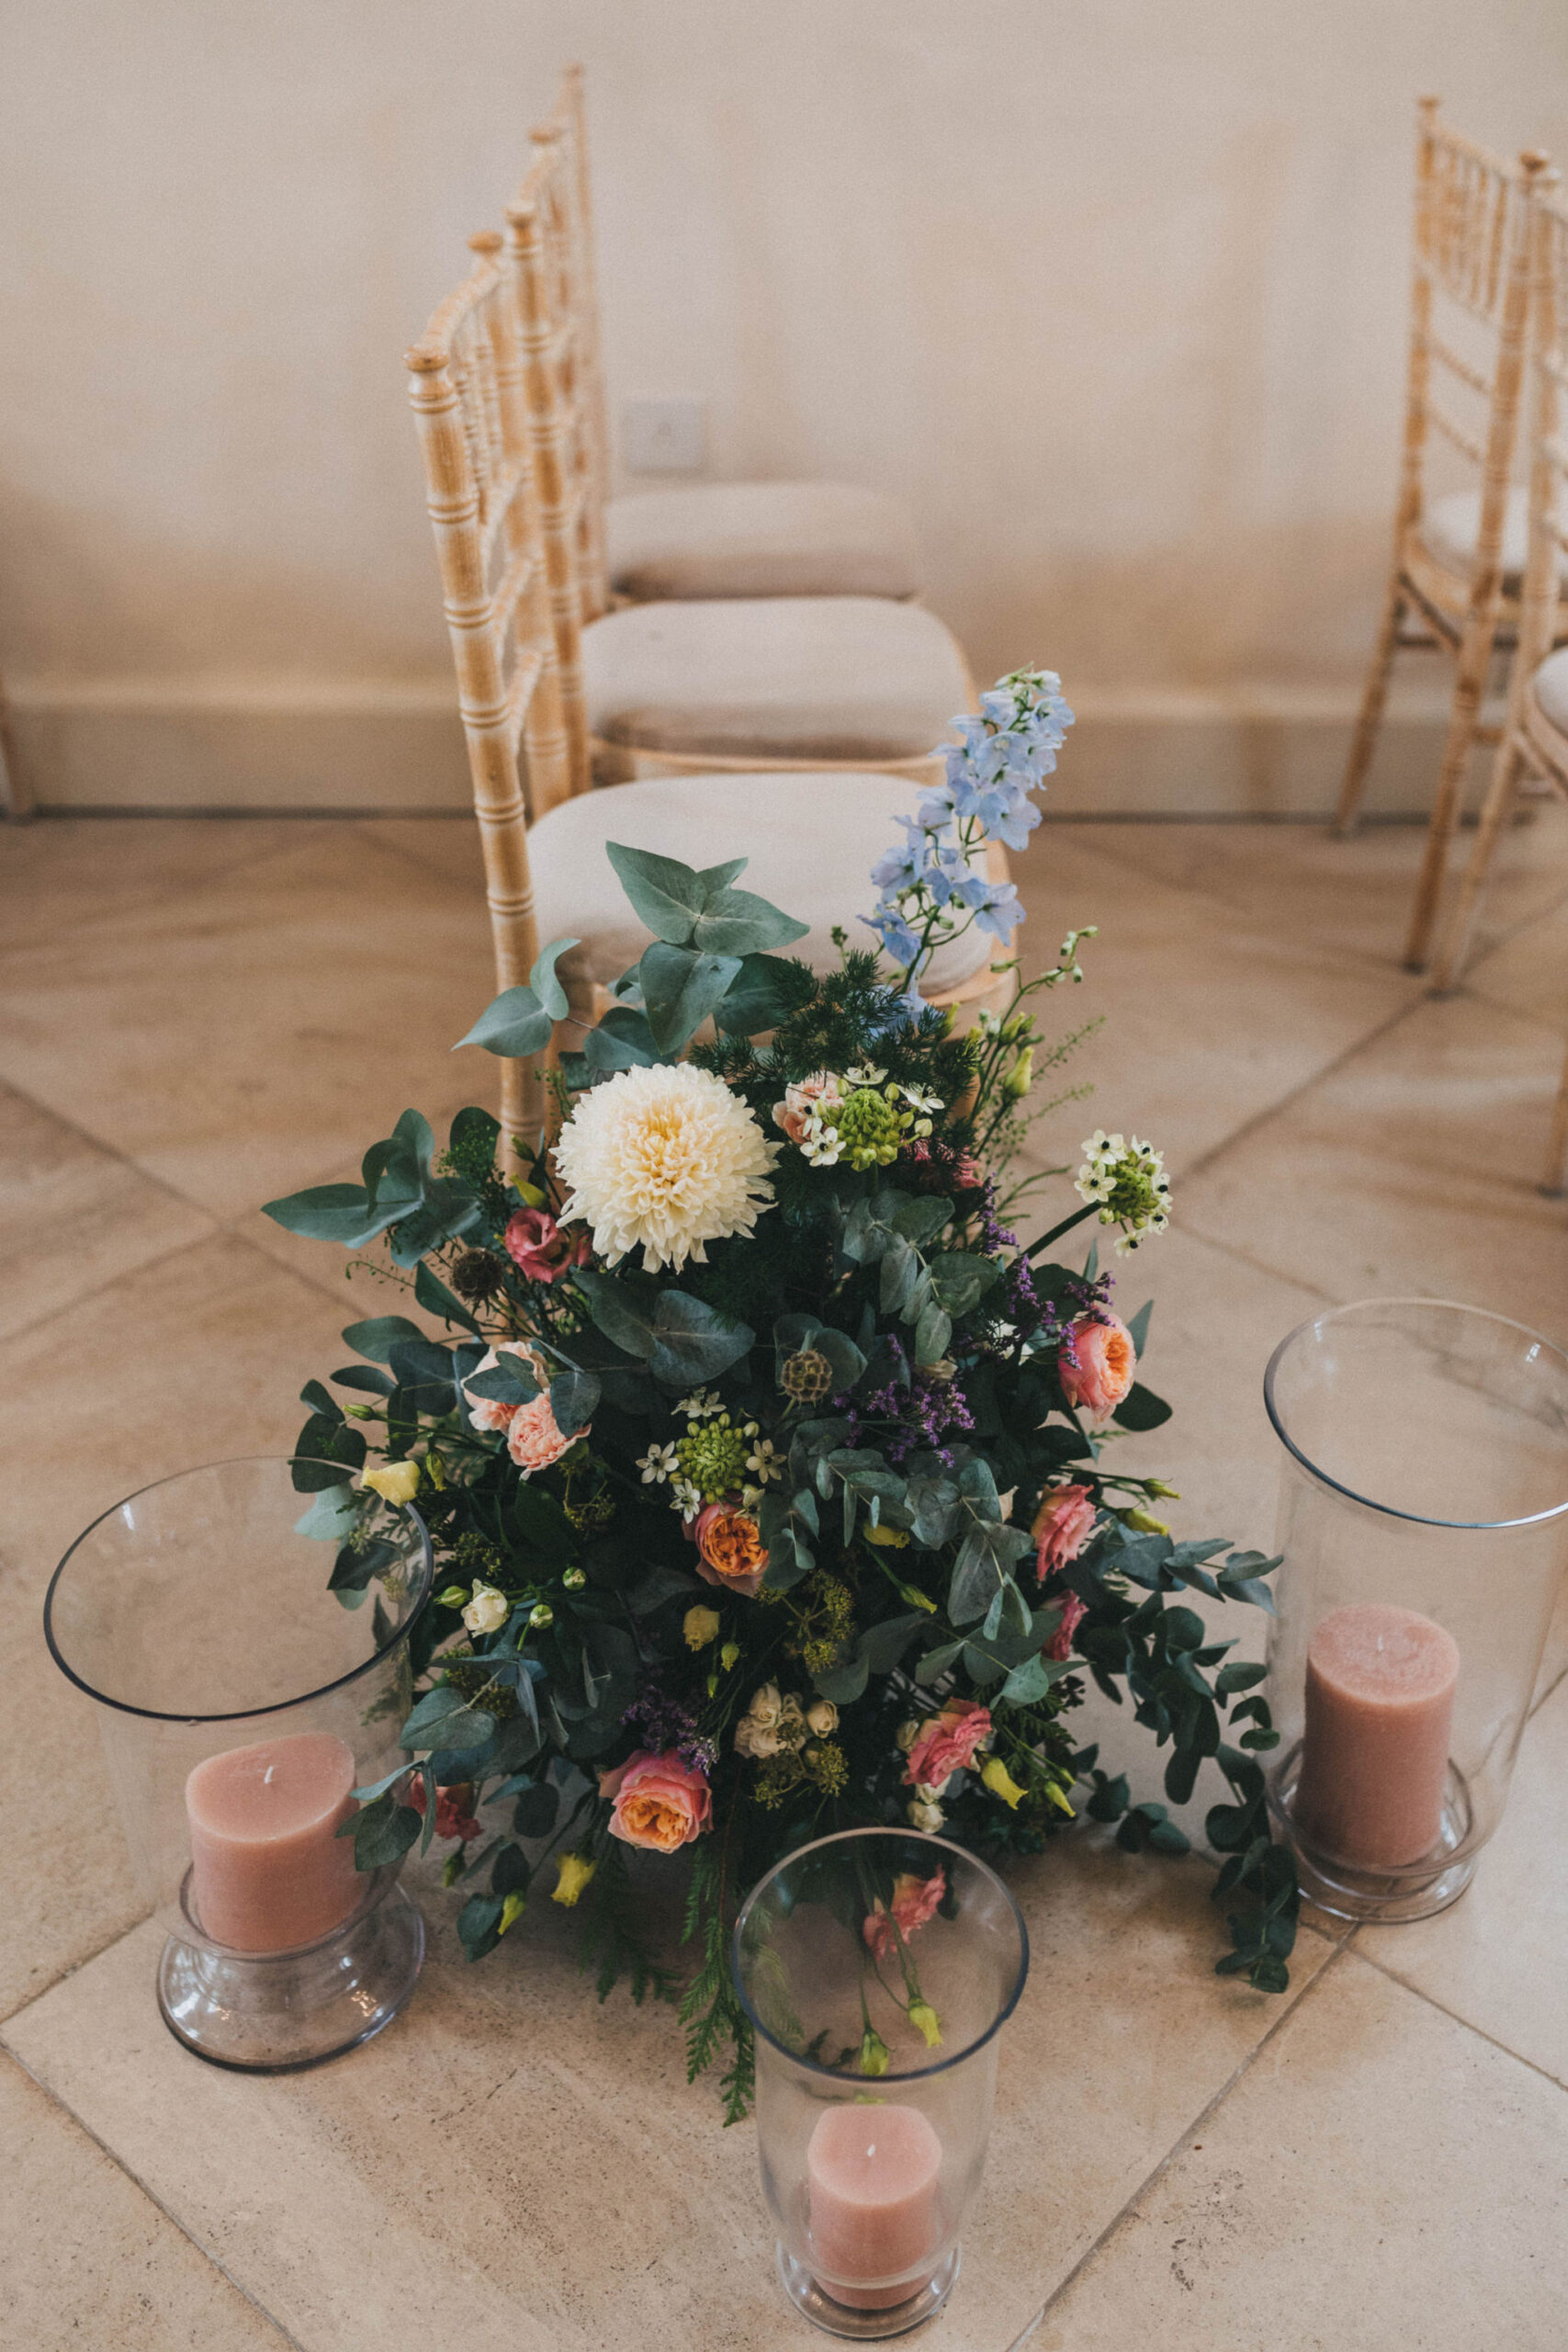 A close up of a floral pew end positioned on the floor makeup of blue, white and orange flowers and foliage